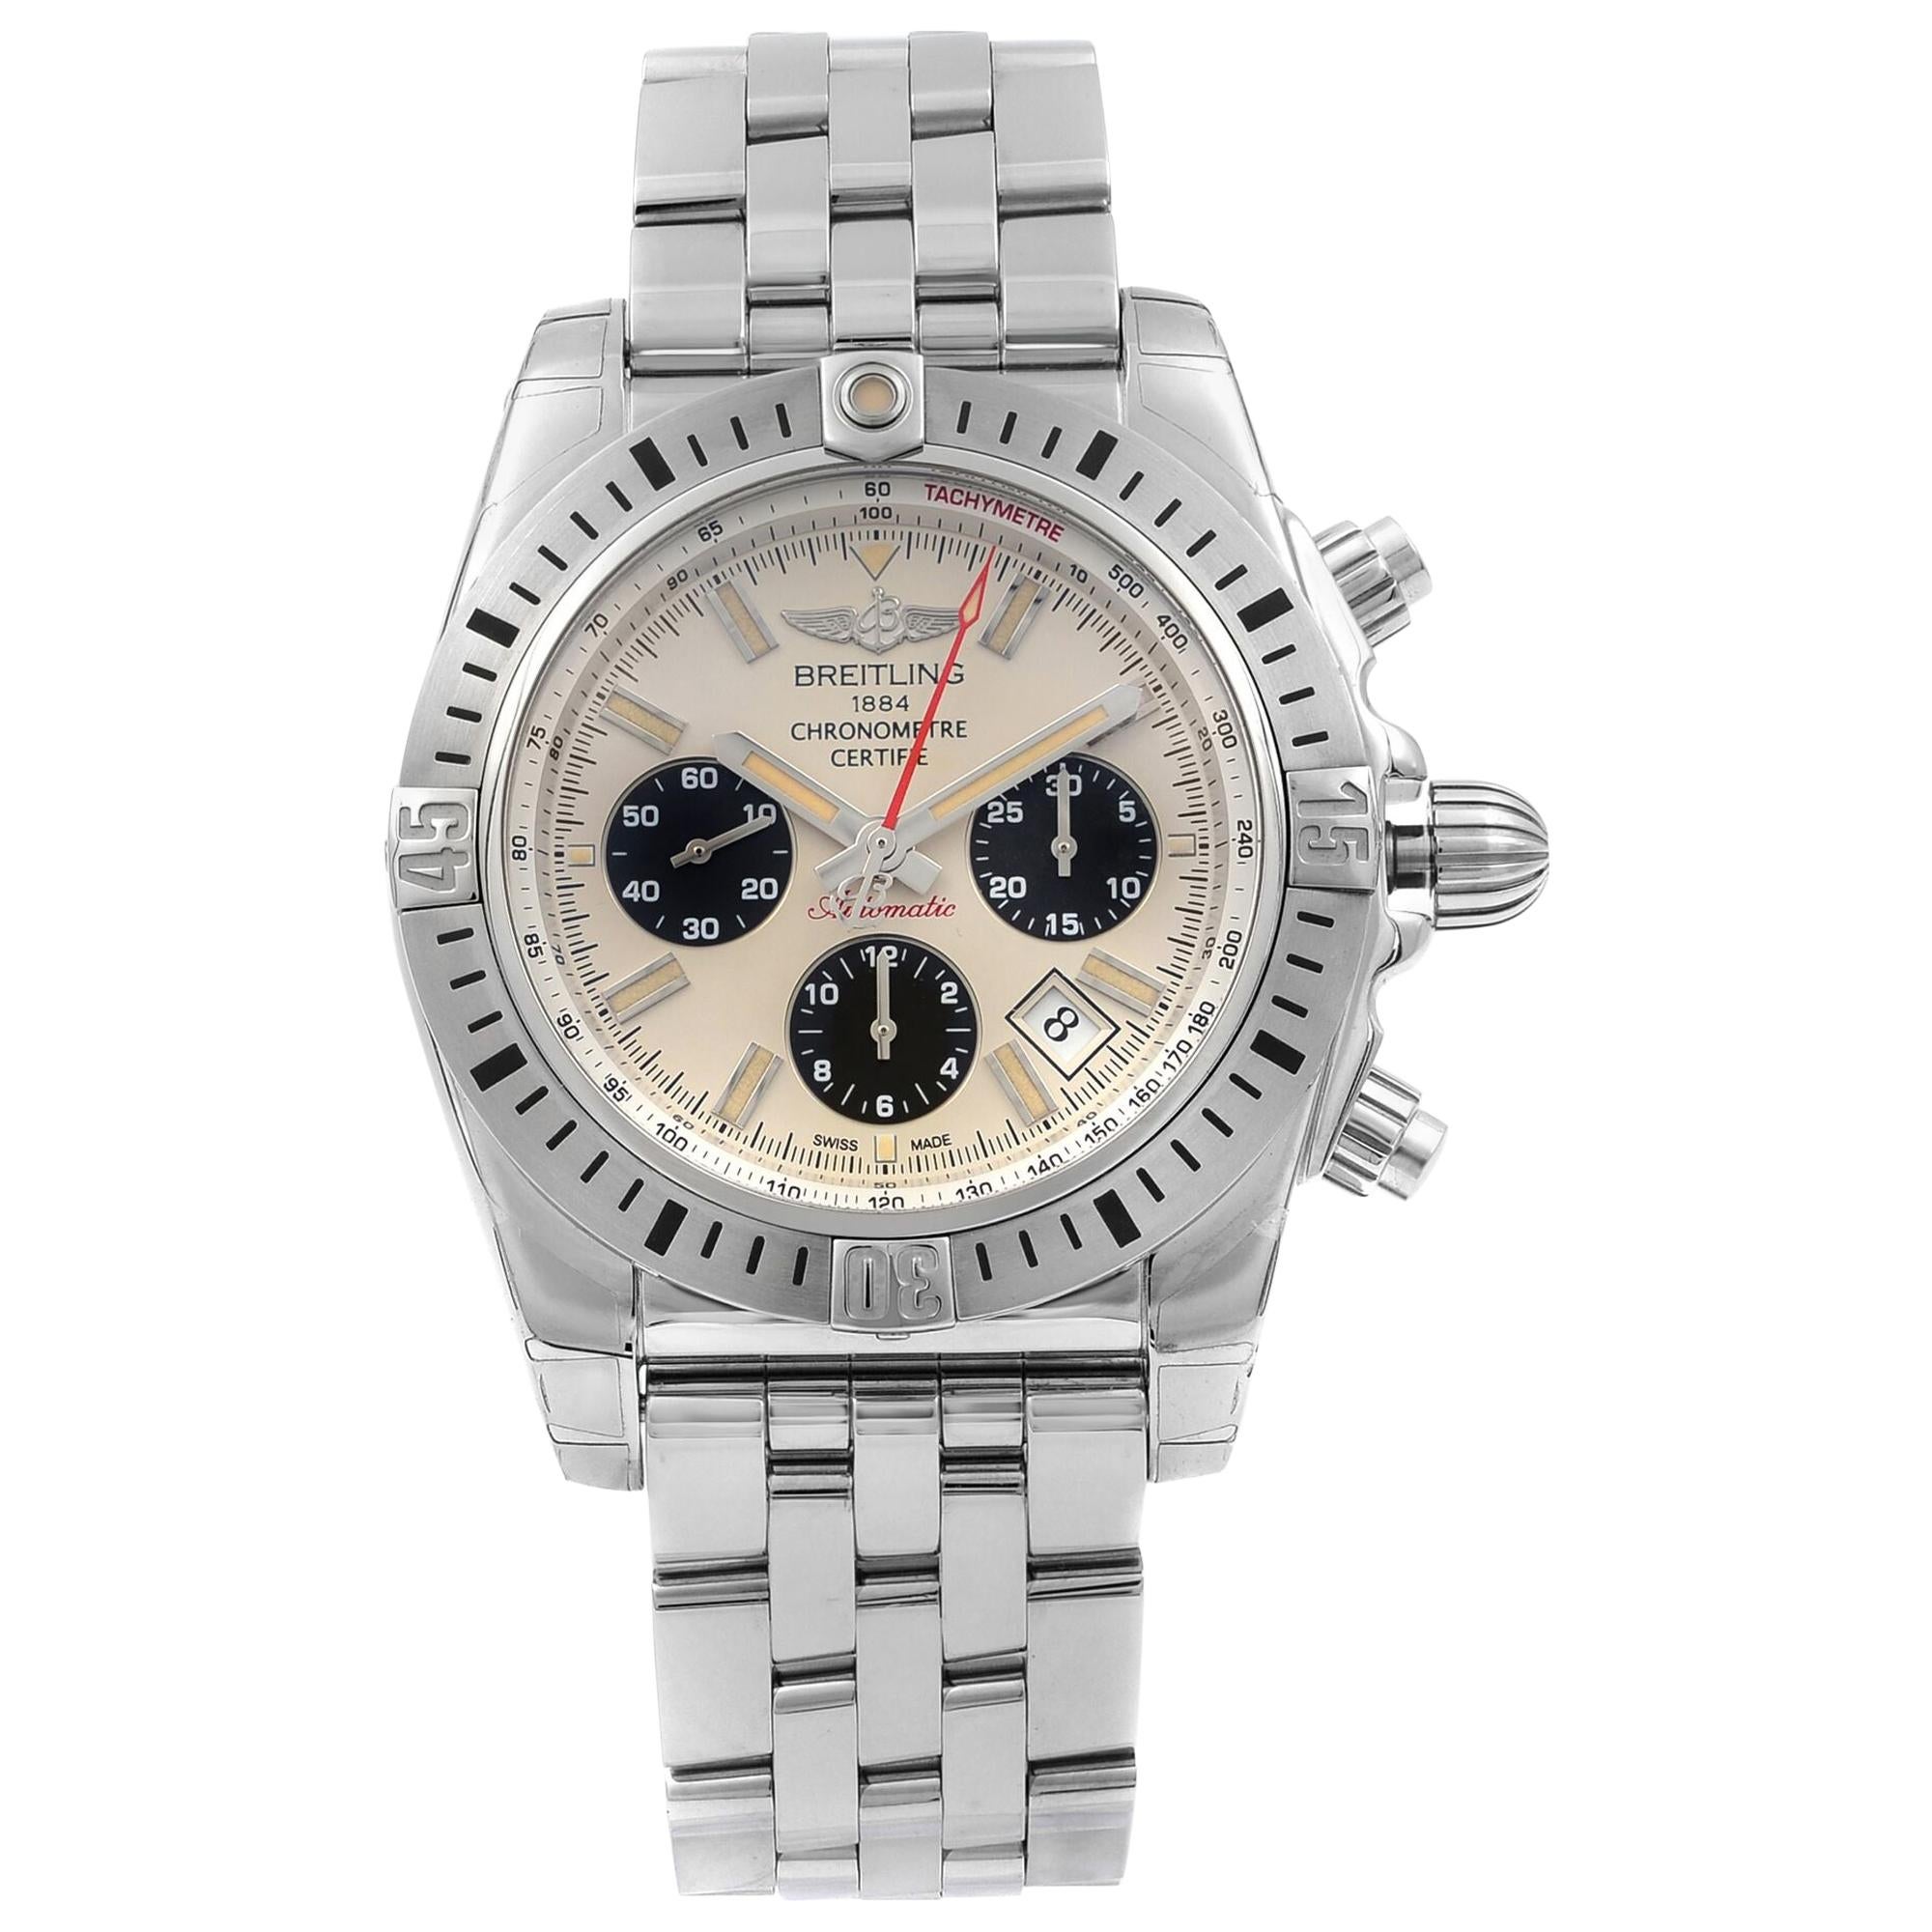 Breitling Chronomat Airborne 44 Steel Silver Dial Men’s Watch AB01154G/G786-375A